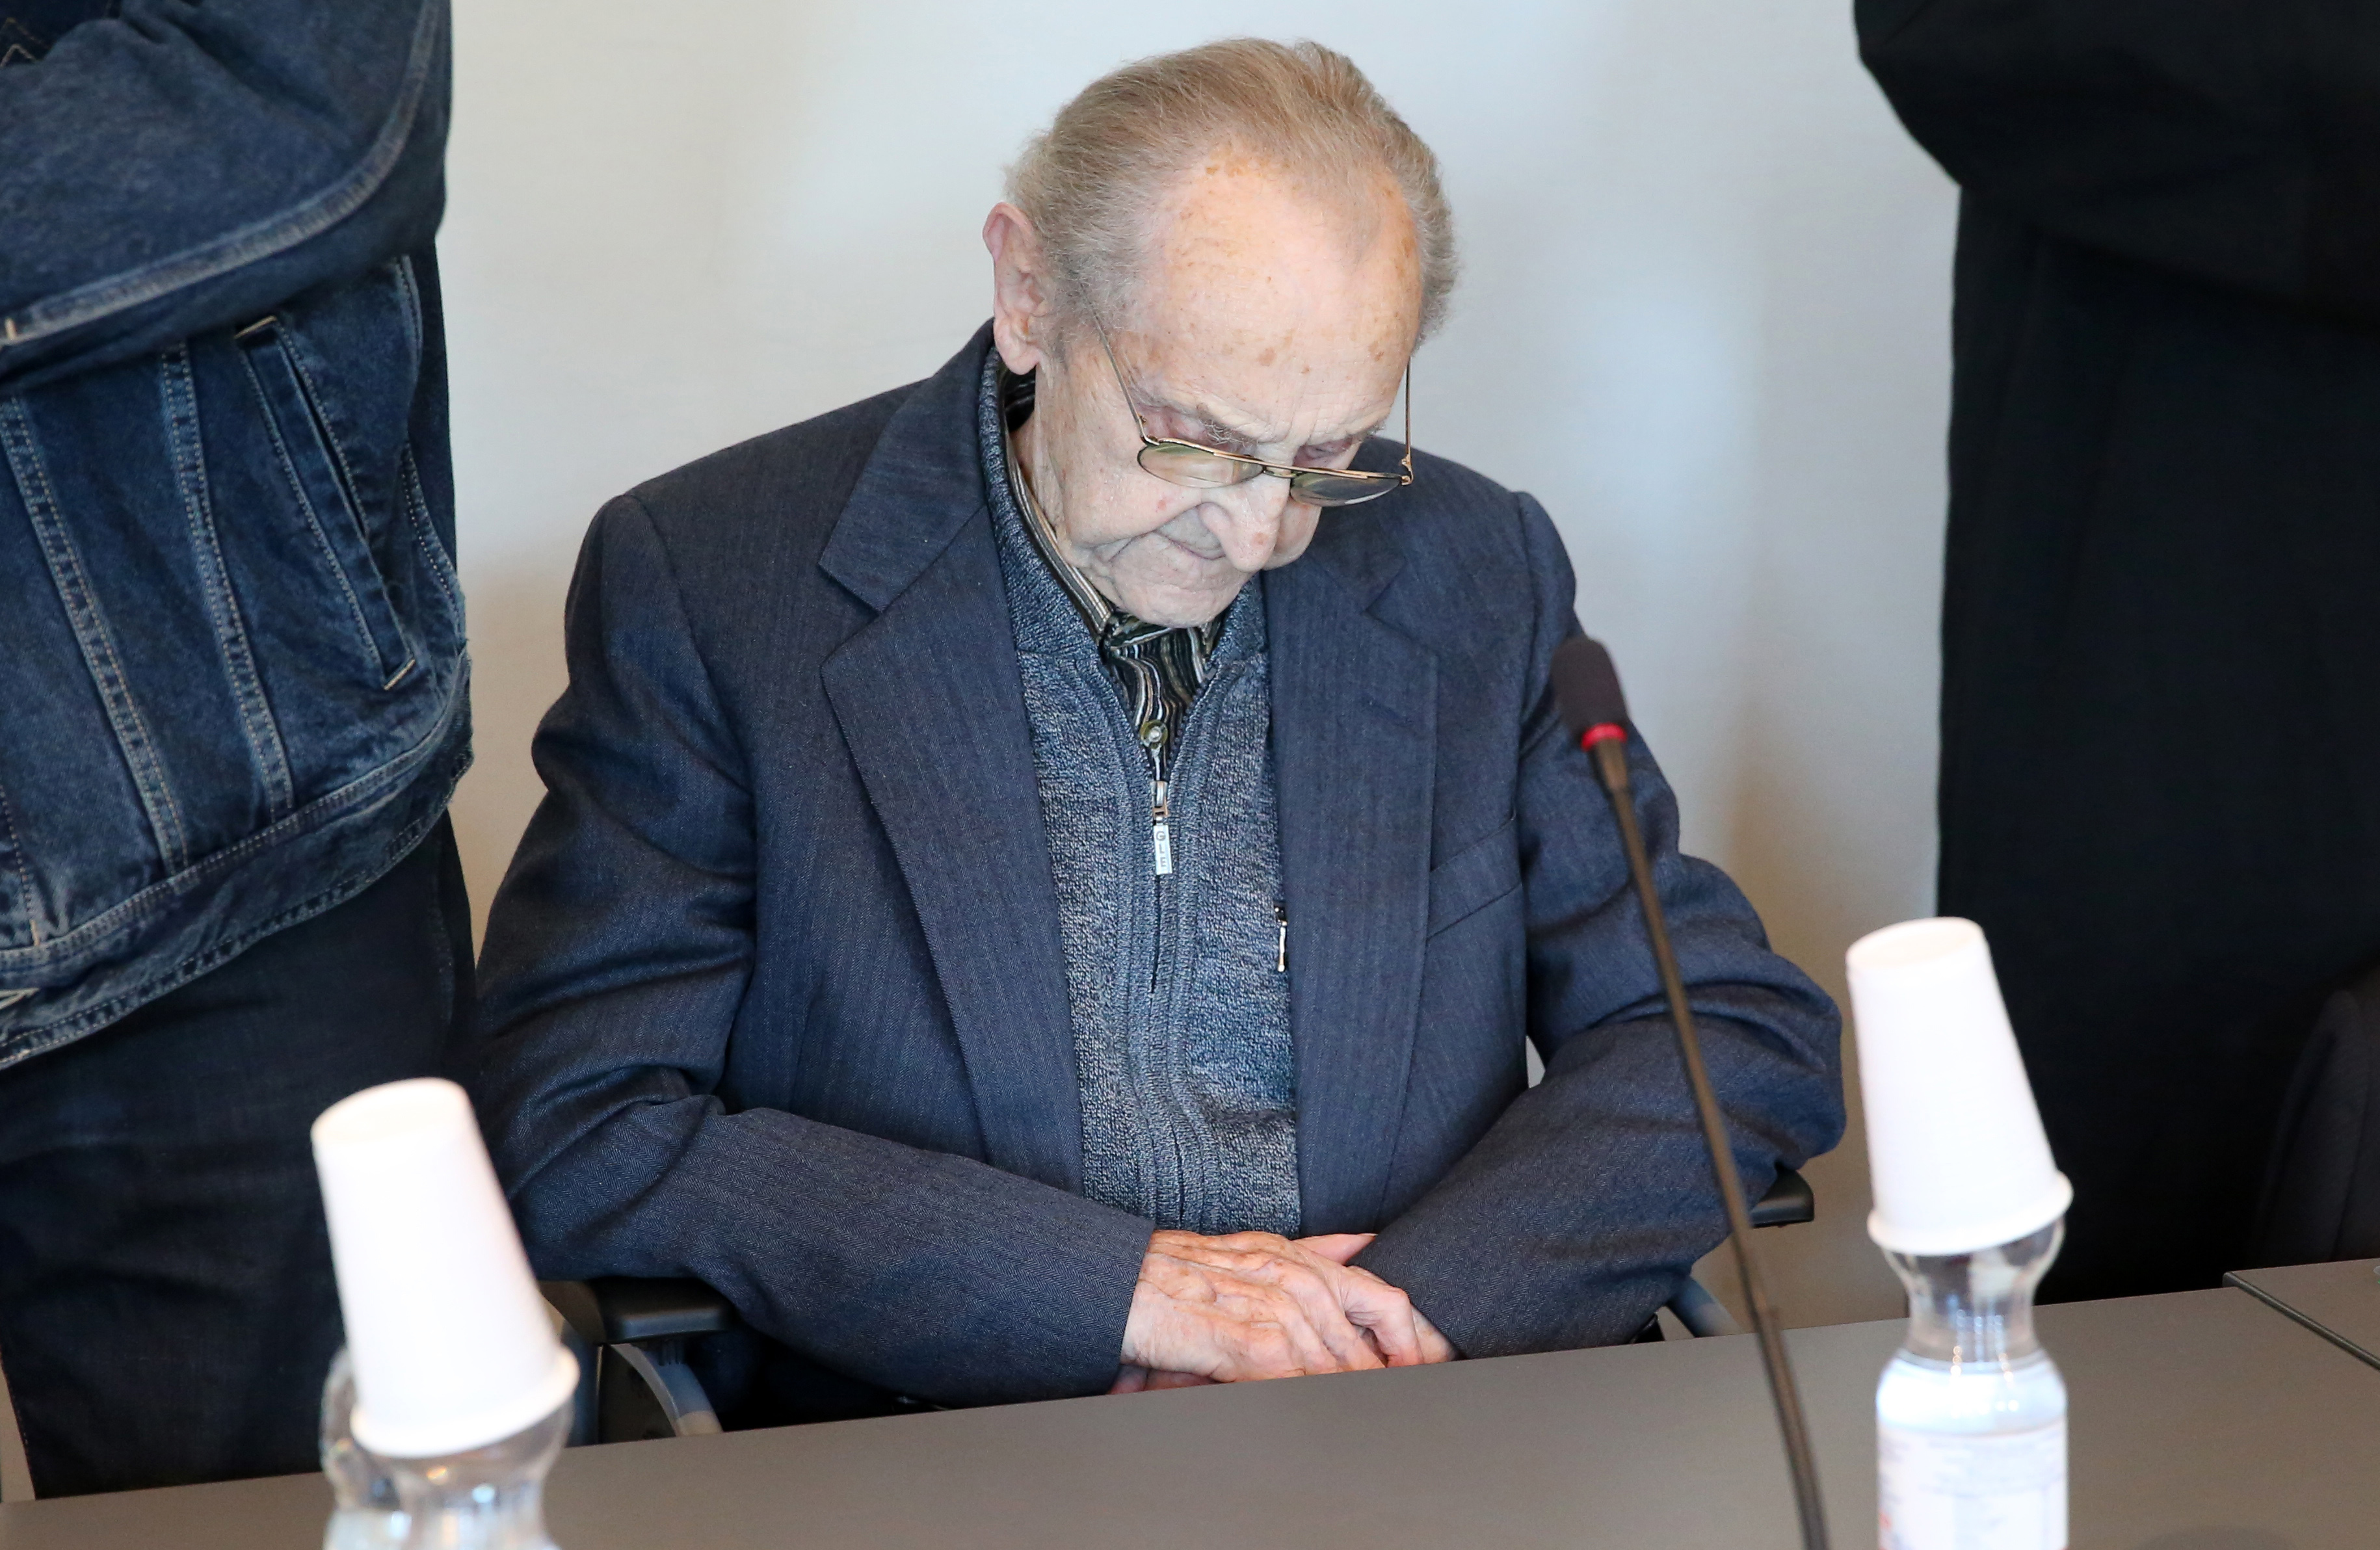 Hubert Zafke sits in a courtroom  ahead of his trial in Neubrandenburg, eastern Germany, Monday, Sept. 12, 2016.  The  former SS medic who served at the Auschwitz death camp has gone on trial in the northern German city of Neubrandenburg, though questions remain about whether the 95-year-old is fit enough for the proceedings to continue. The trial of Hubert Zafke, scheduled to start in February, had already been postponed three times after Presiding Judge Klaus Kabisch said his health was not good enough to proceed, based upon a doctors assessment.  (Bernd Wuestneck/dpa via AP)